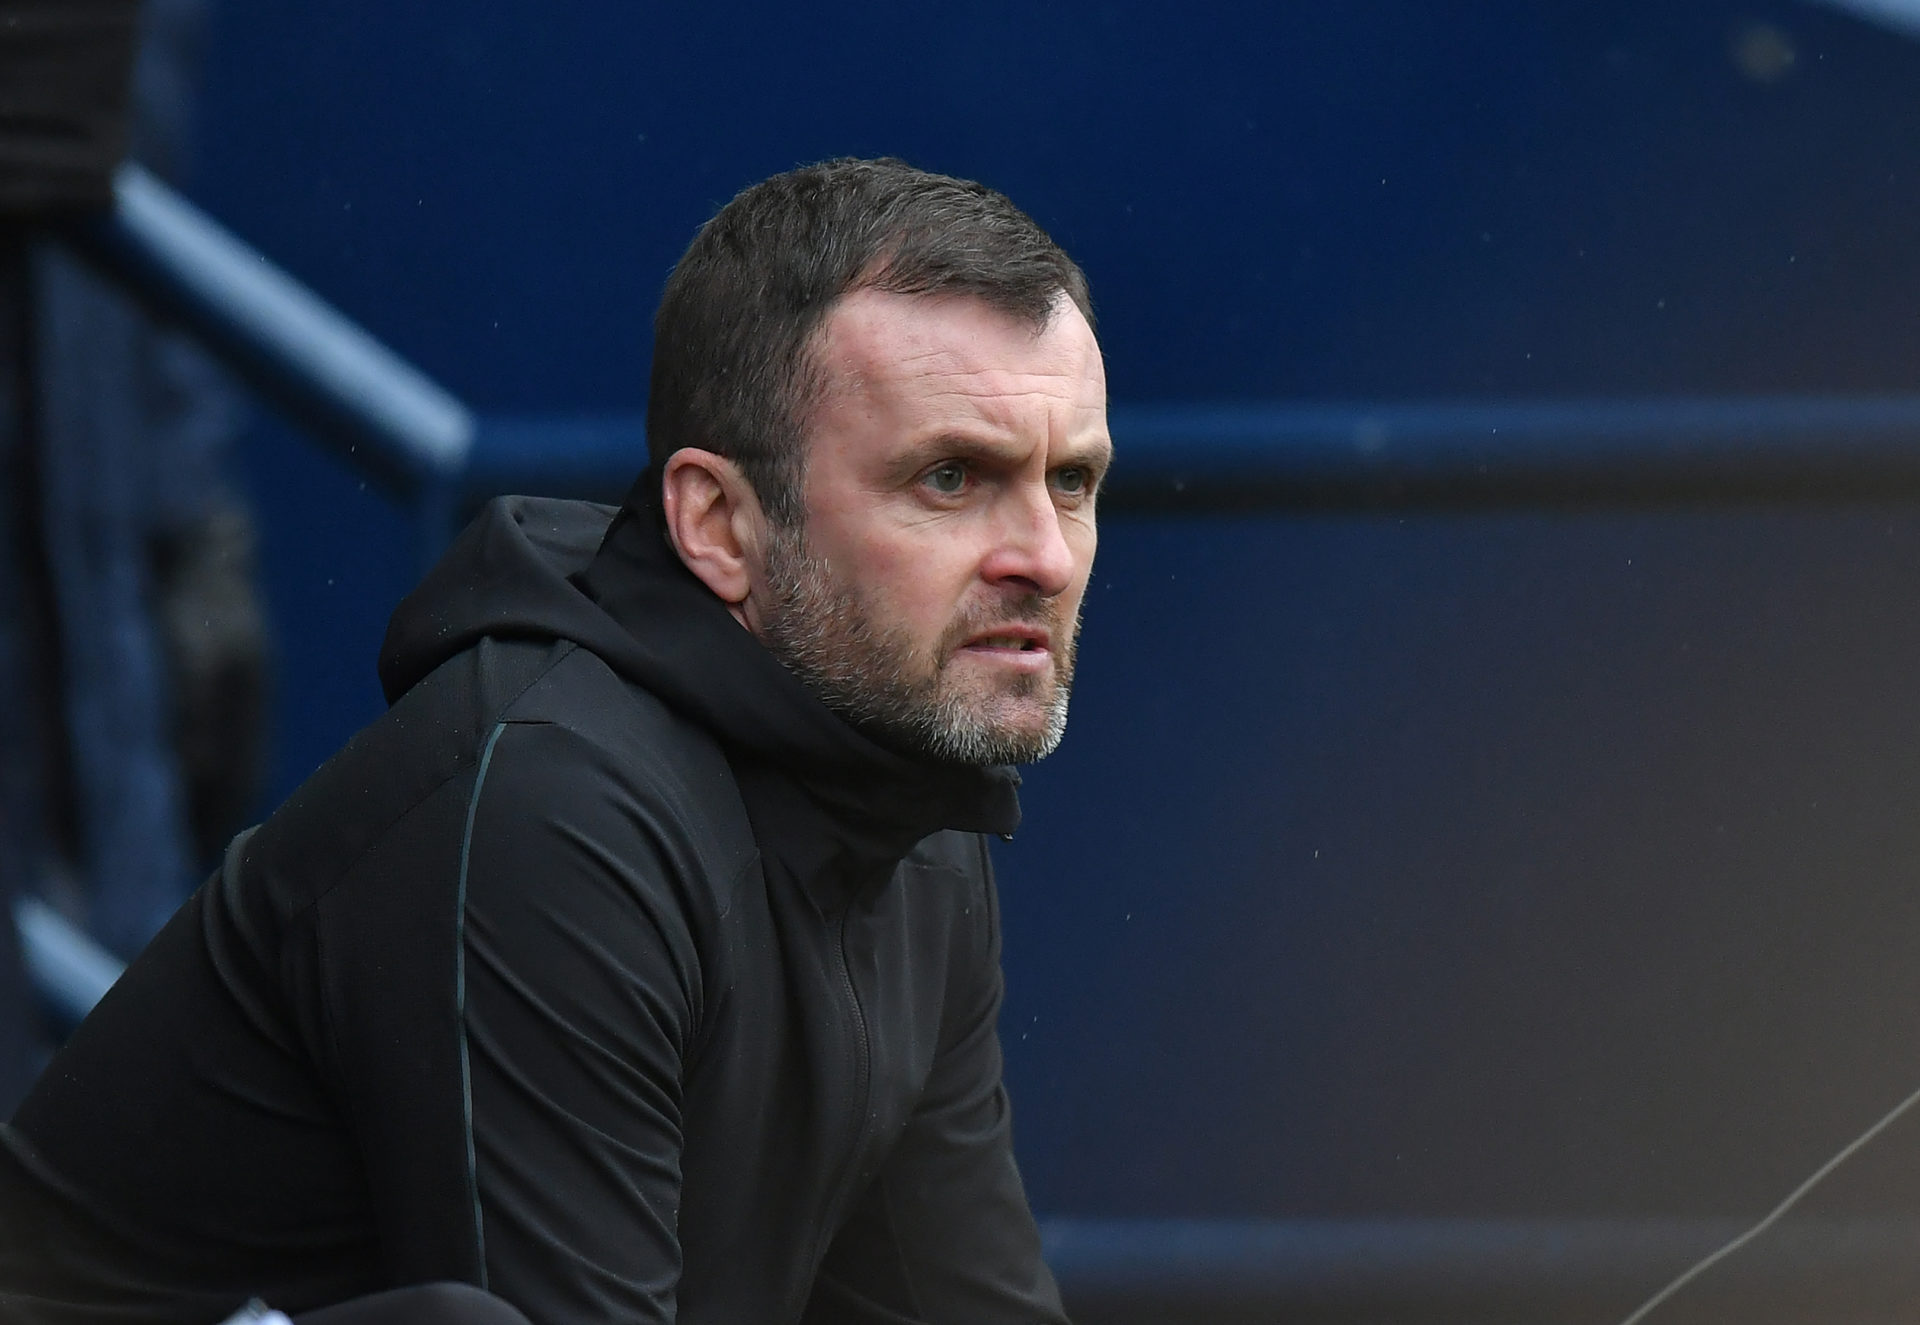 Failed Southampton wonderkid is now thriving under divisive ex-manager Nathan Jones